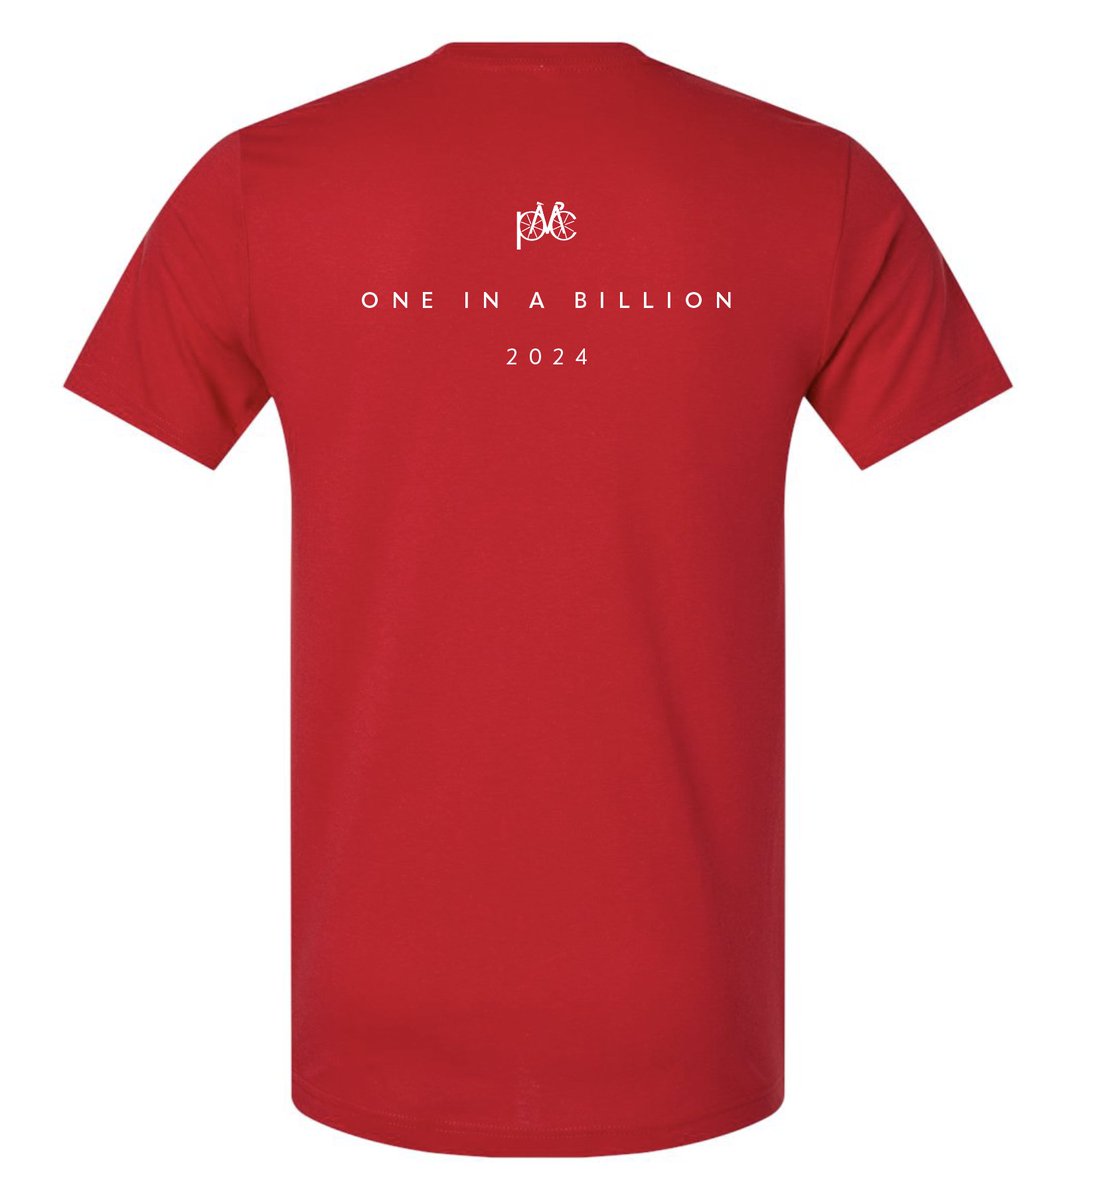 The PMC is throwing it back for our 45th year by celebrating with our signature ORIGINAL tee!  Channel our billion dollar year energy with our deep history while wearing our 1980 tee! #PMC2024 #OneInABillion  hubs.ly/Q02y_JBM0